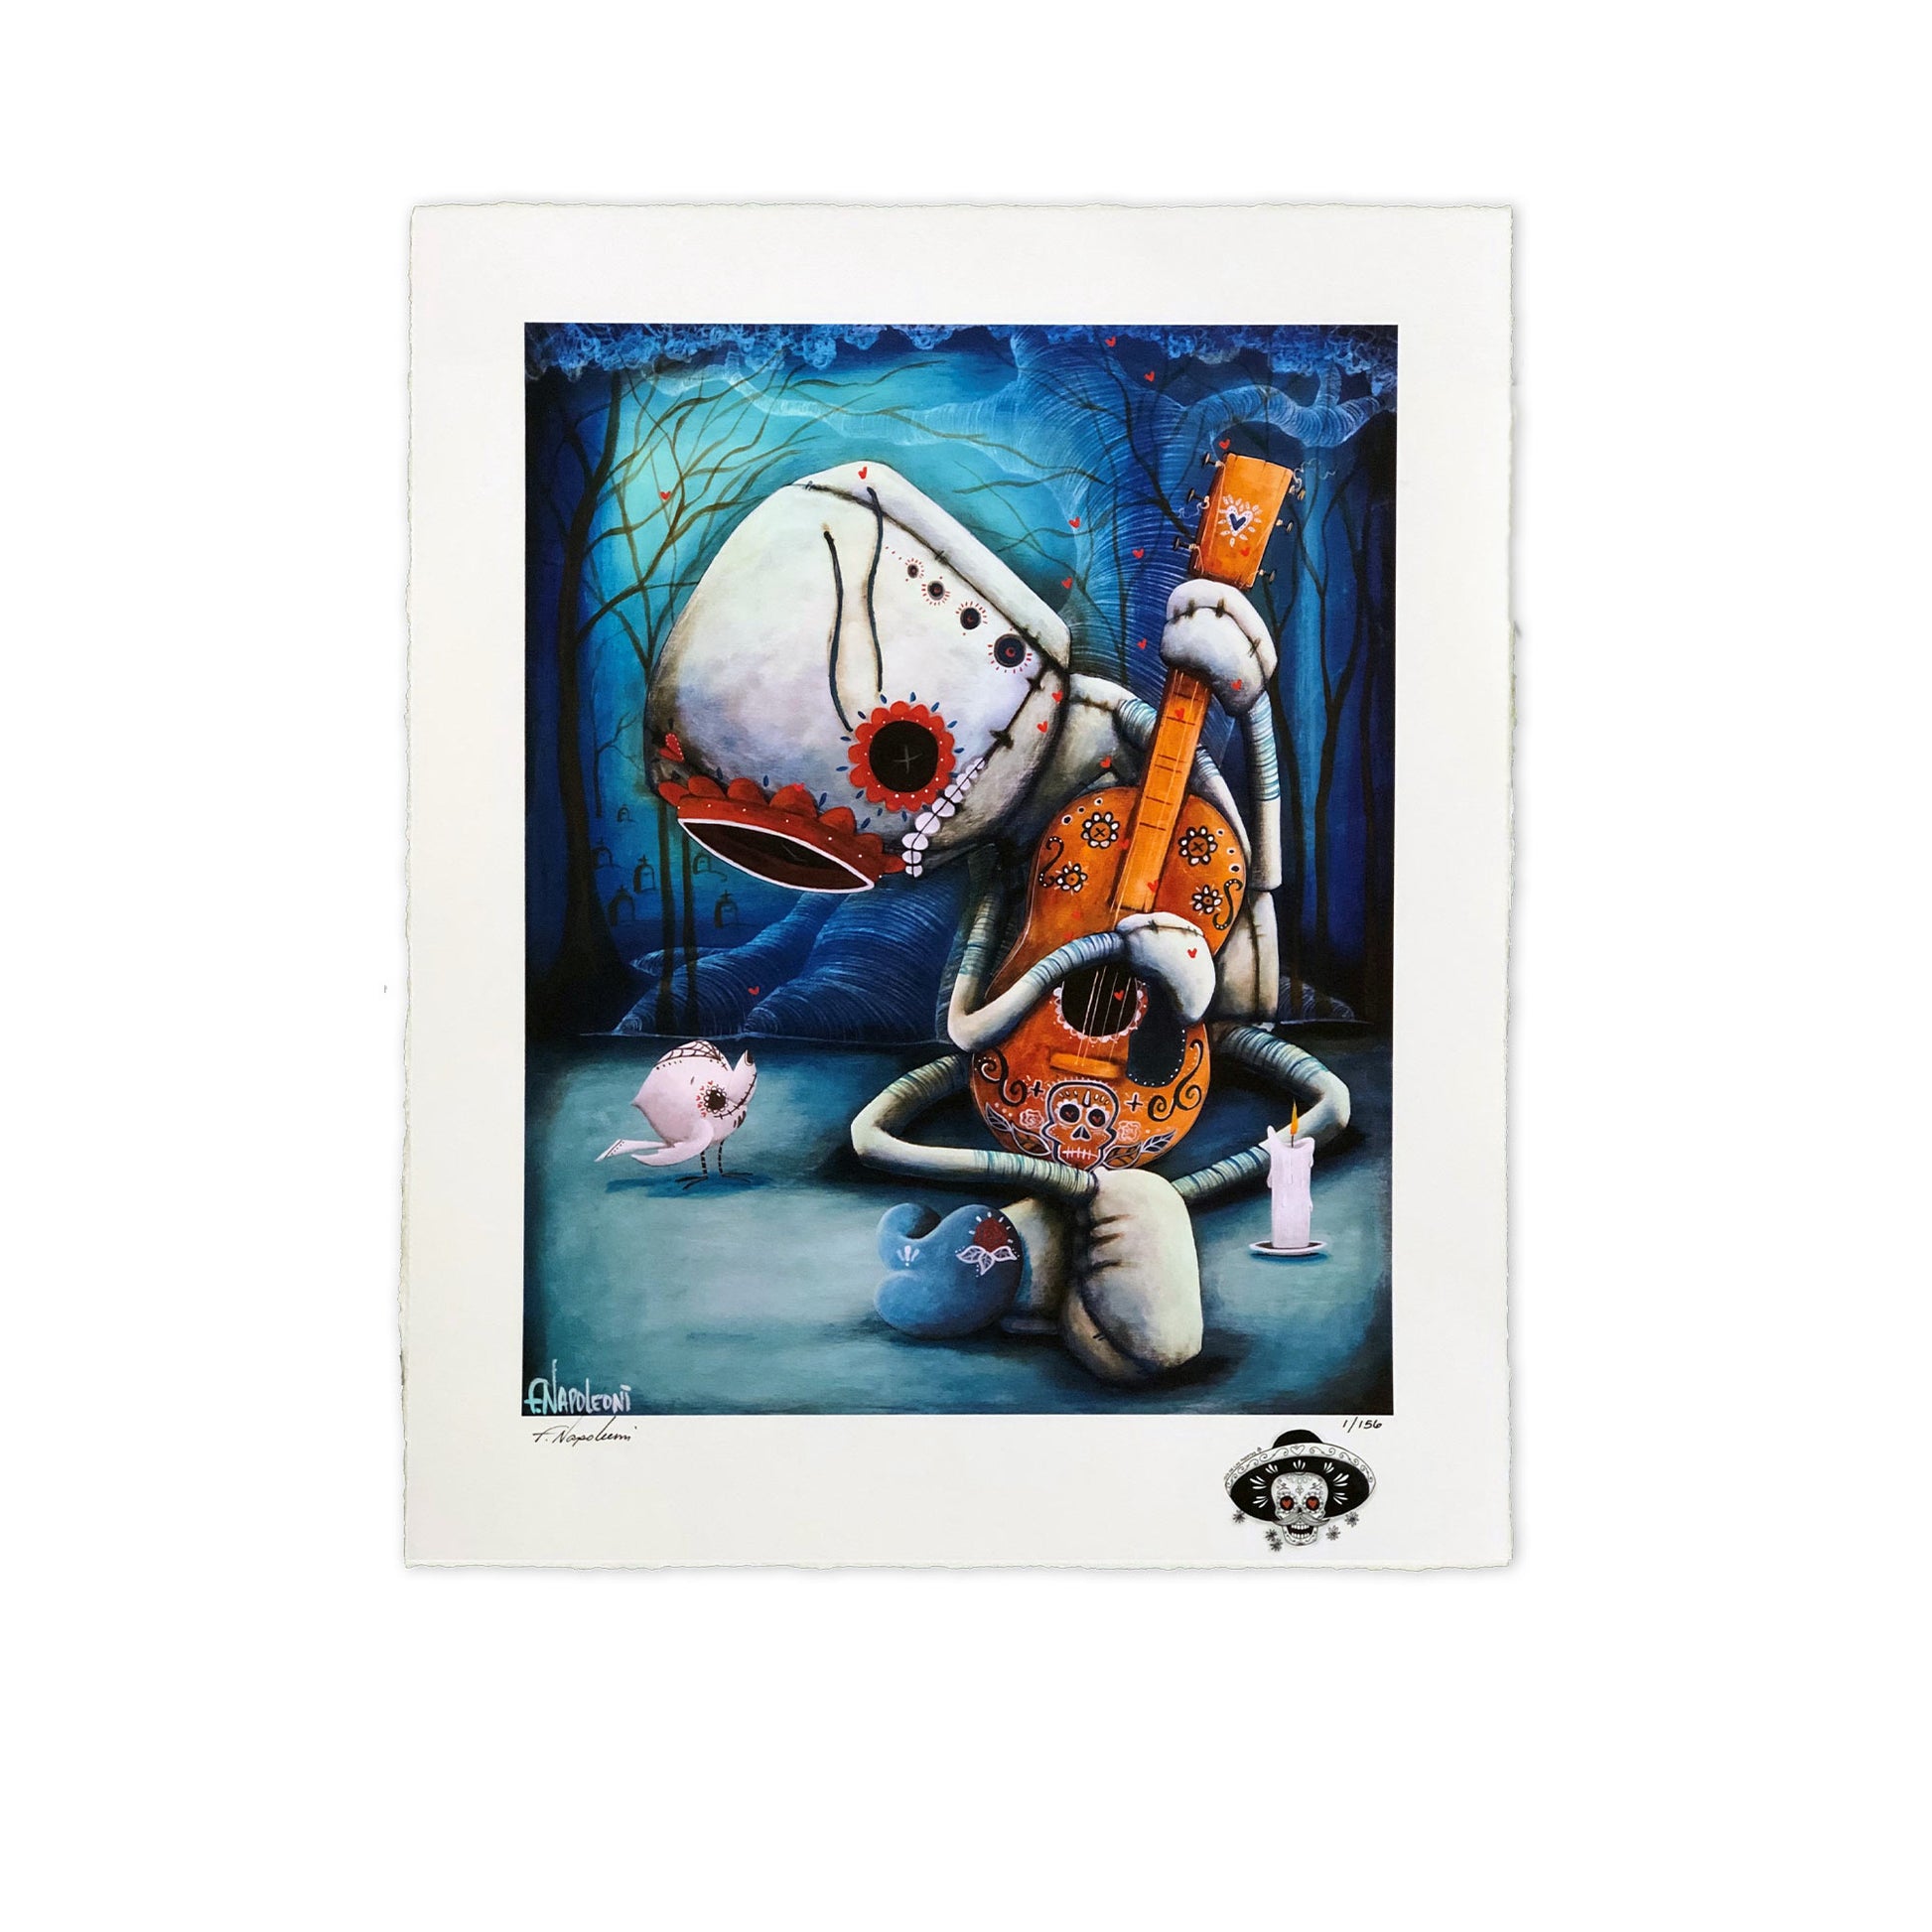 Fabio Napoleoni "Day of the Dead" Playing on my Heartstrings Remix Limited Edition Paper Giclee